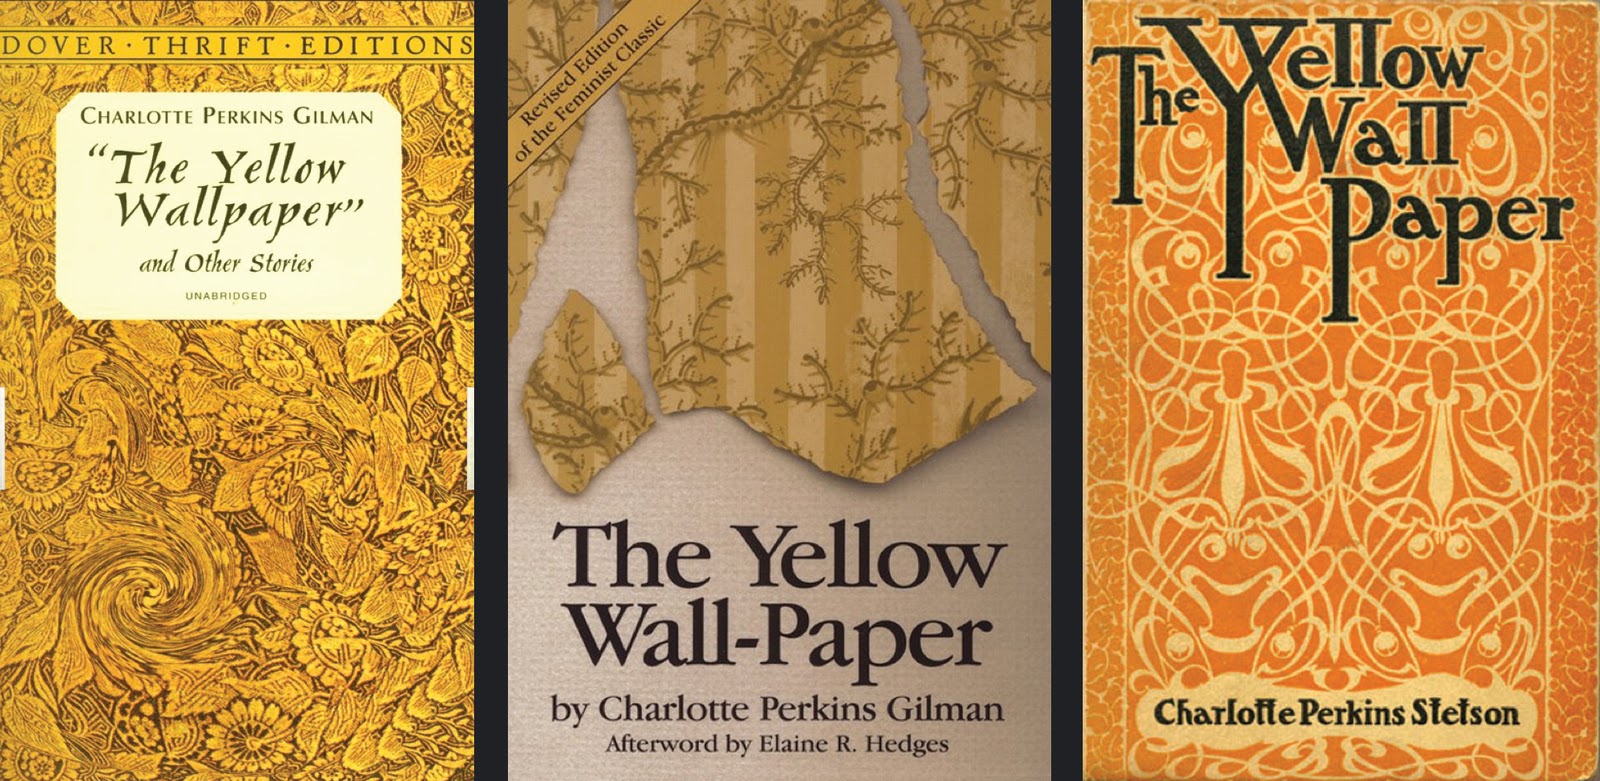 The Yellow Wallpaper By Charlotte Perkins Gilman Party